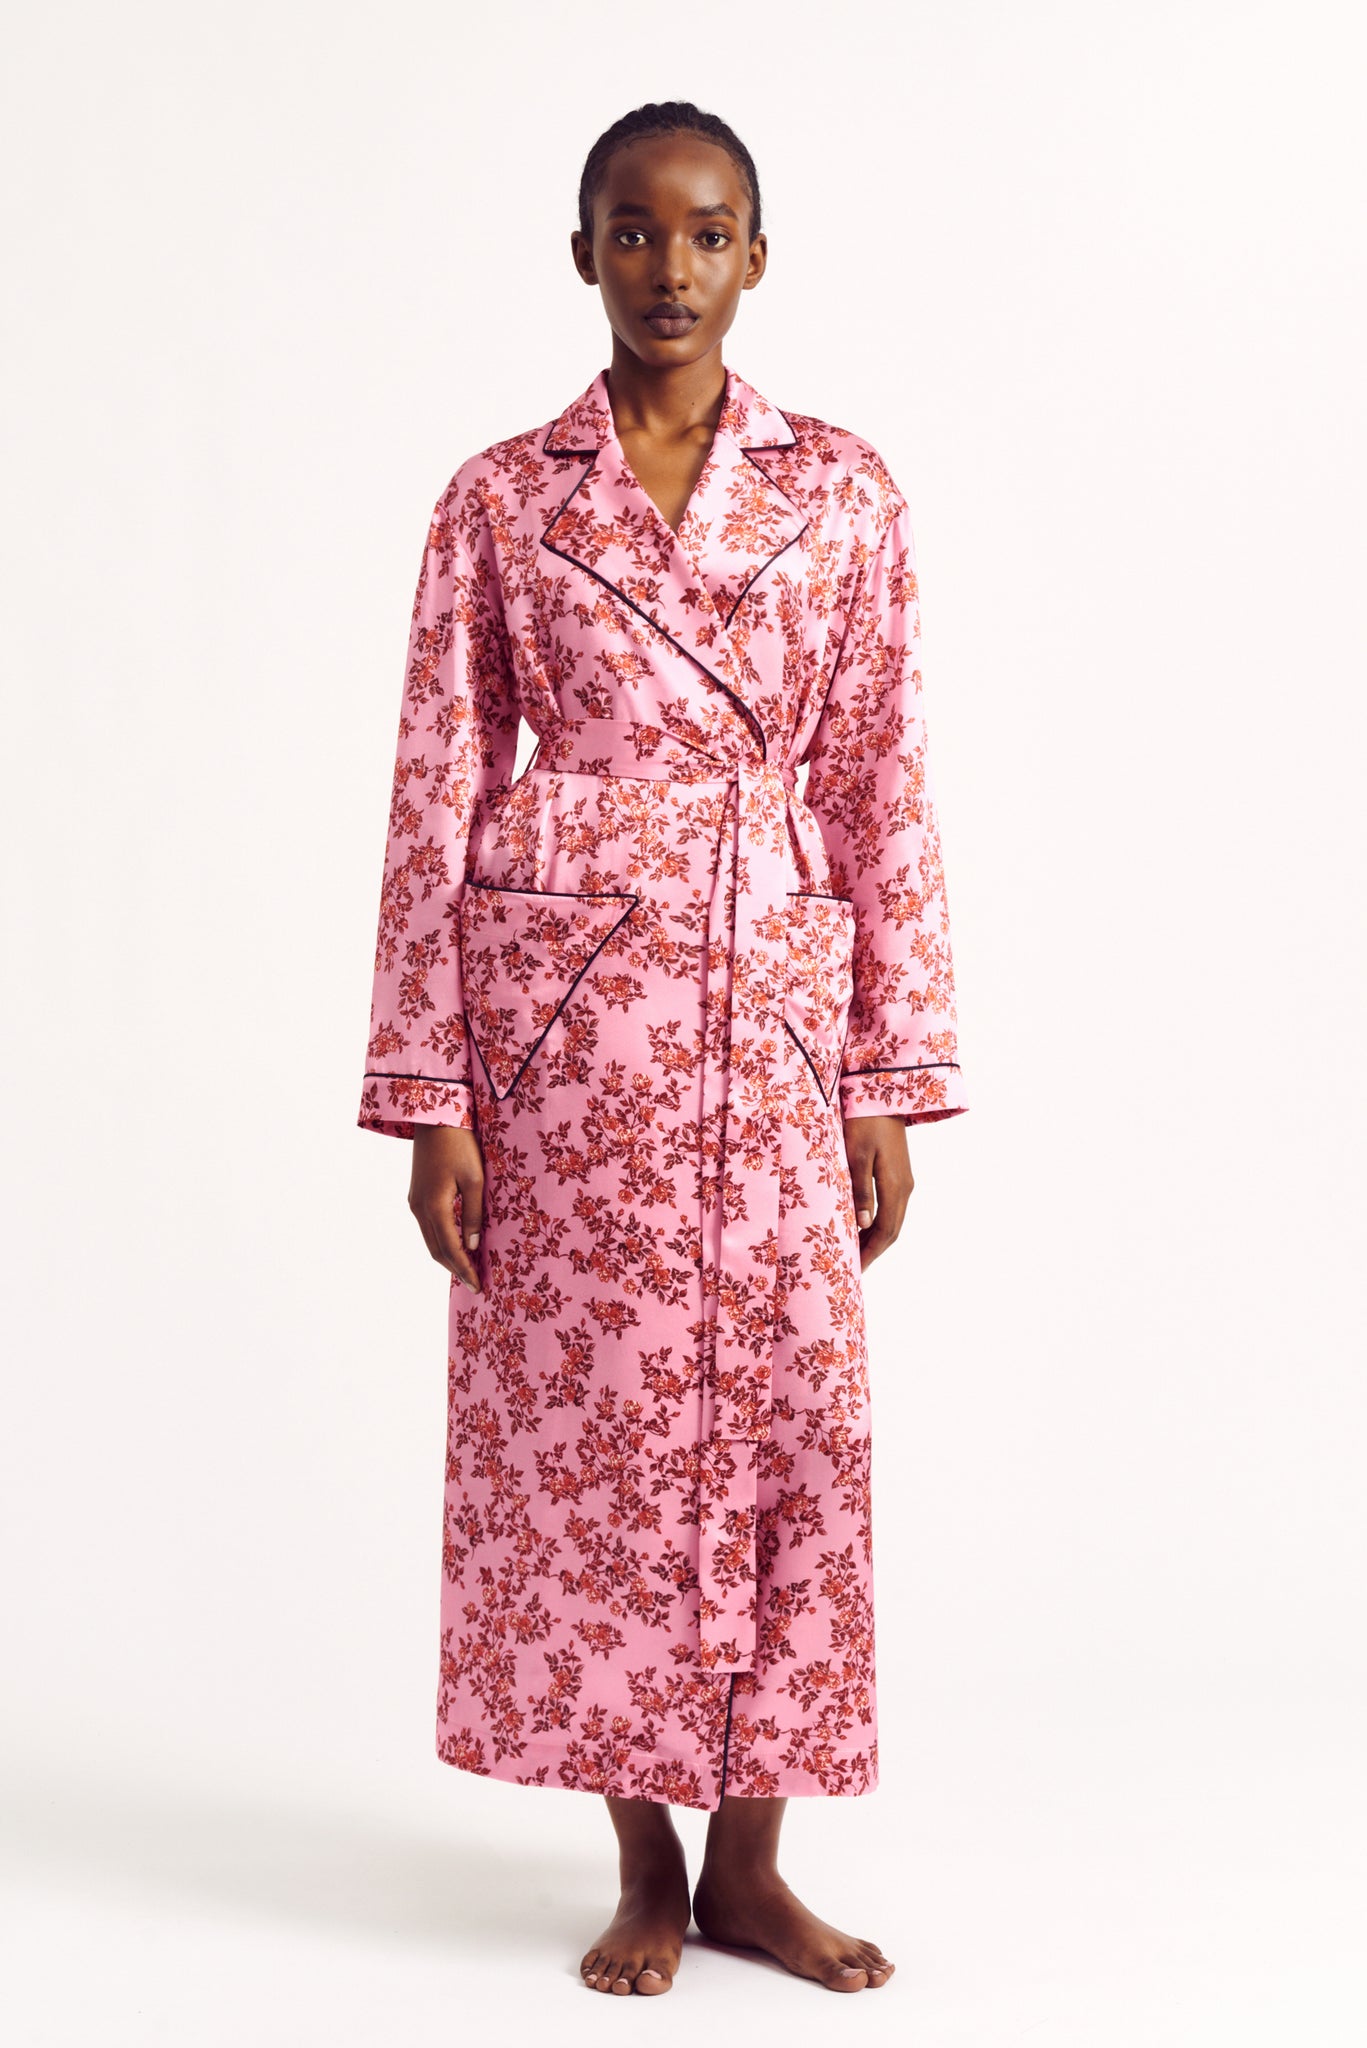 Amana Dressing Gown in Red Roses On Pink Silk Satin